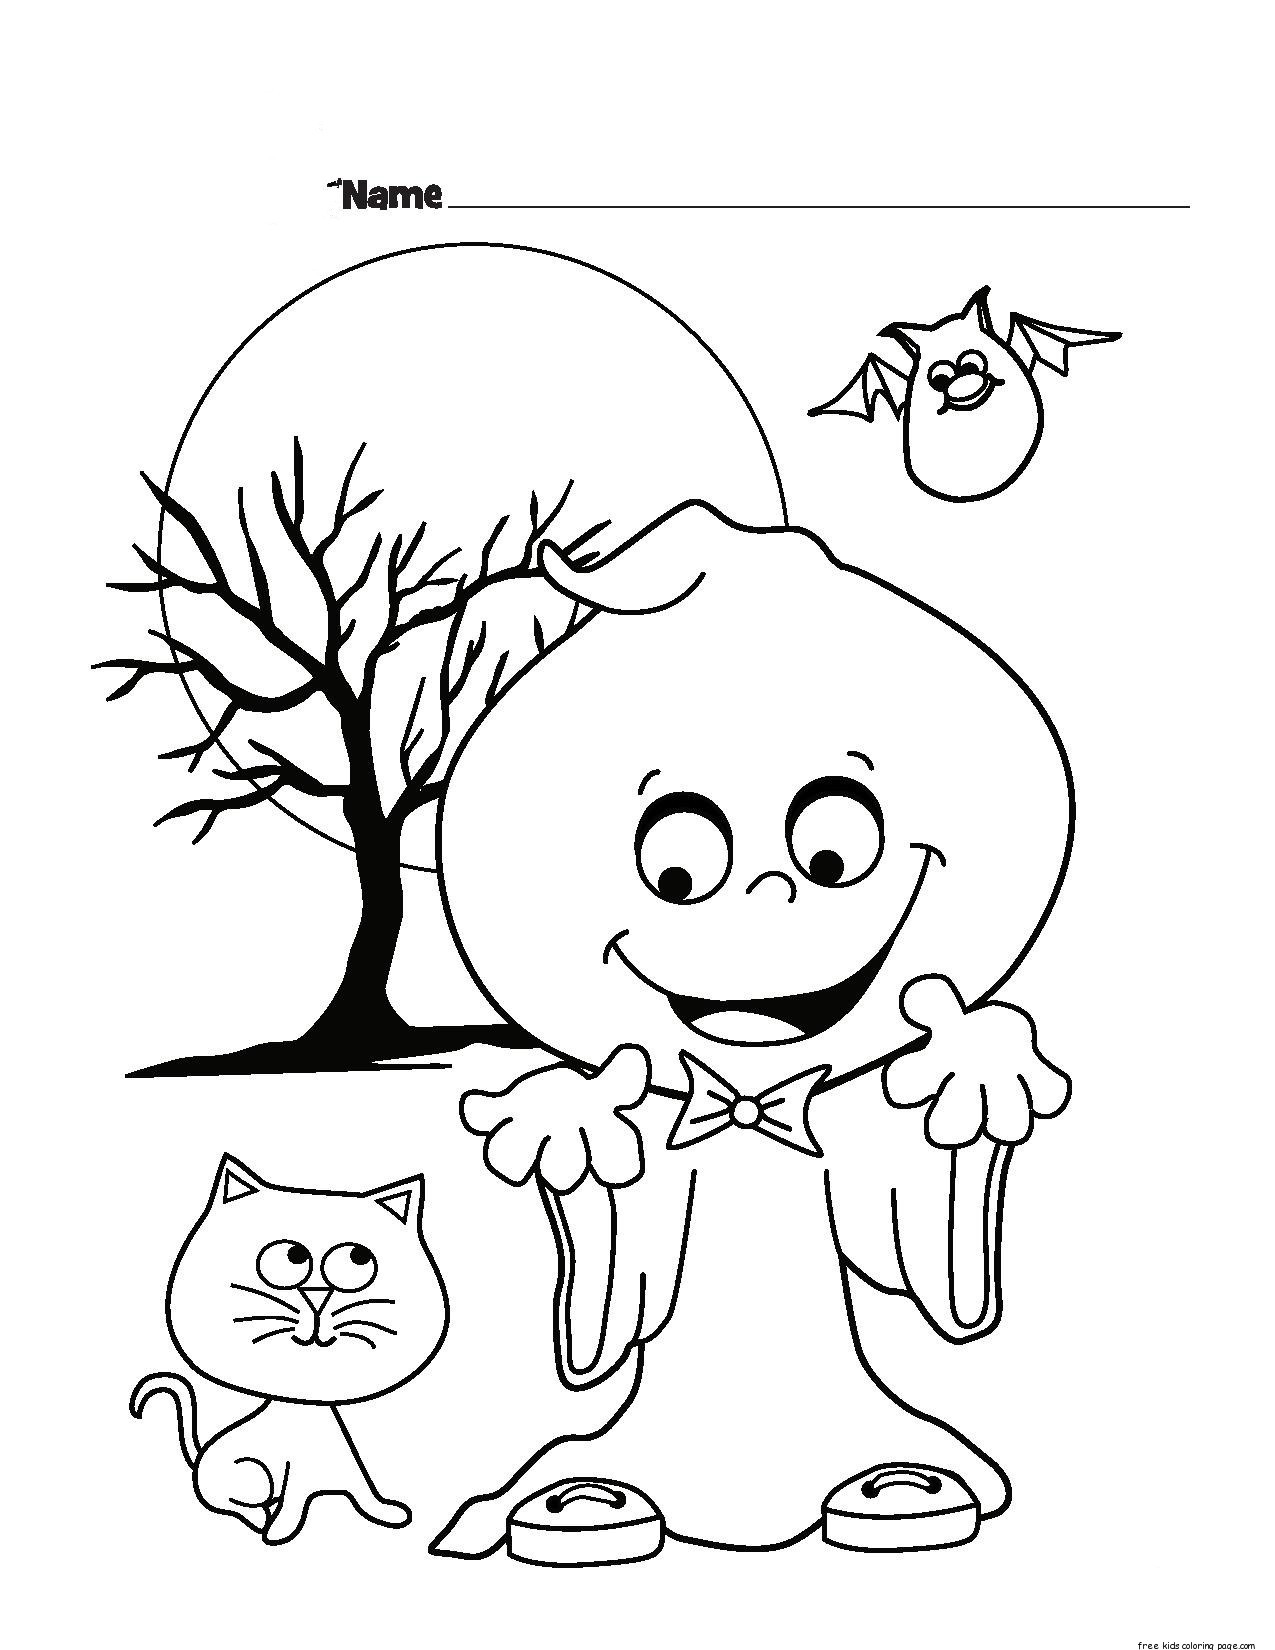 Free Printable Toddler Coloring Sheets
 halloween ghost printable coloring pages for kidsFree